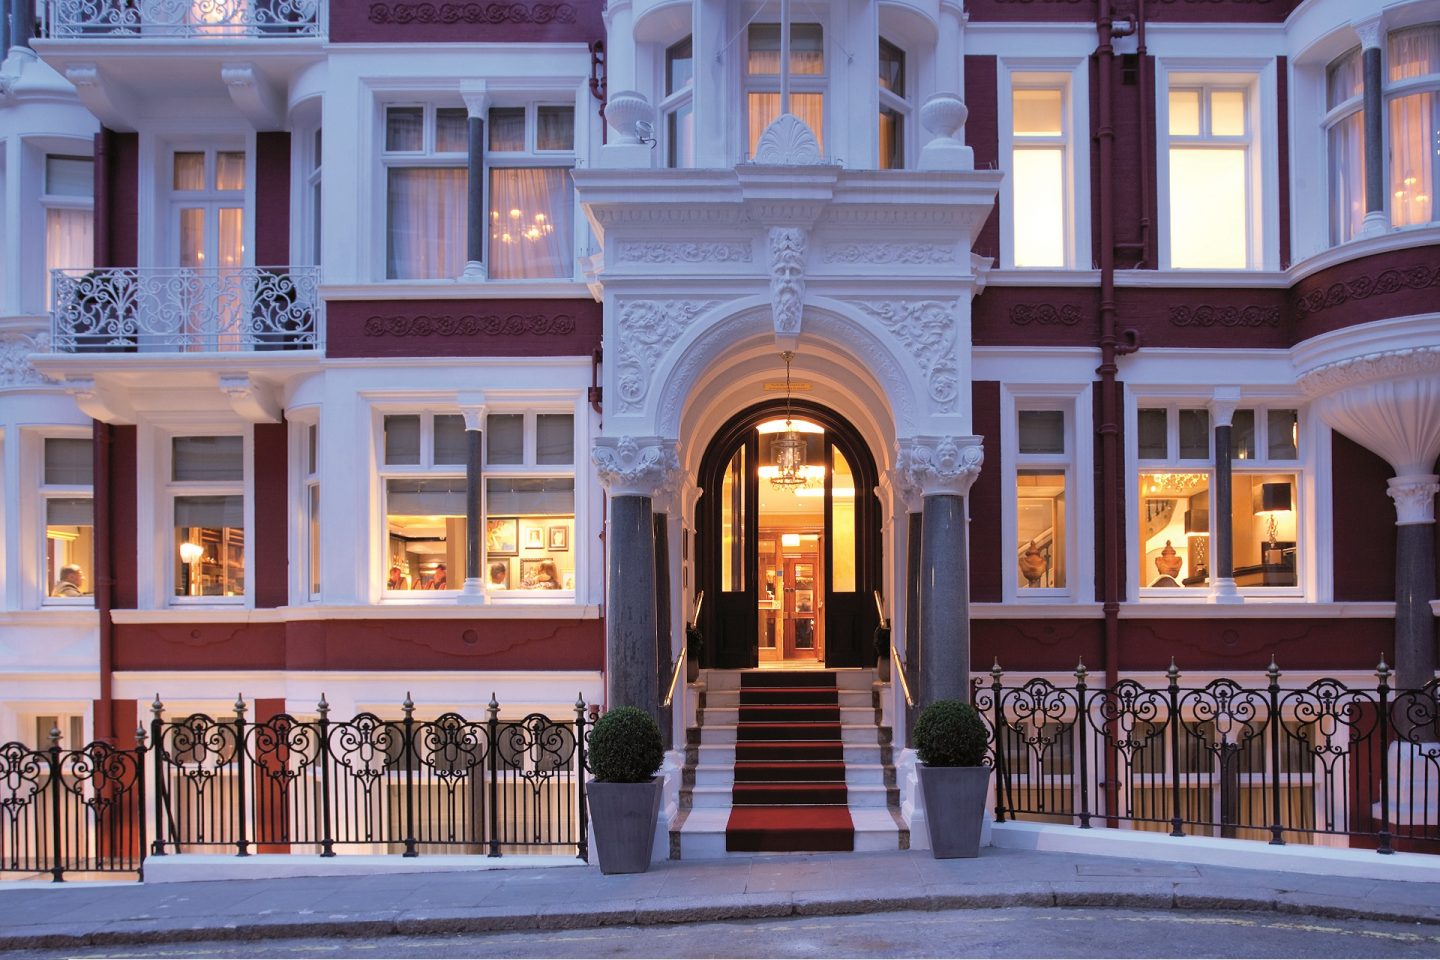 London's Greatest Ever Hotels With Gourmet Stay Offers - Luxury